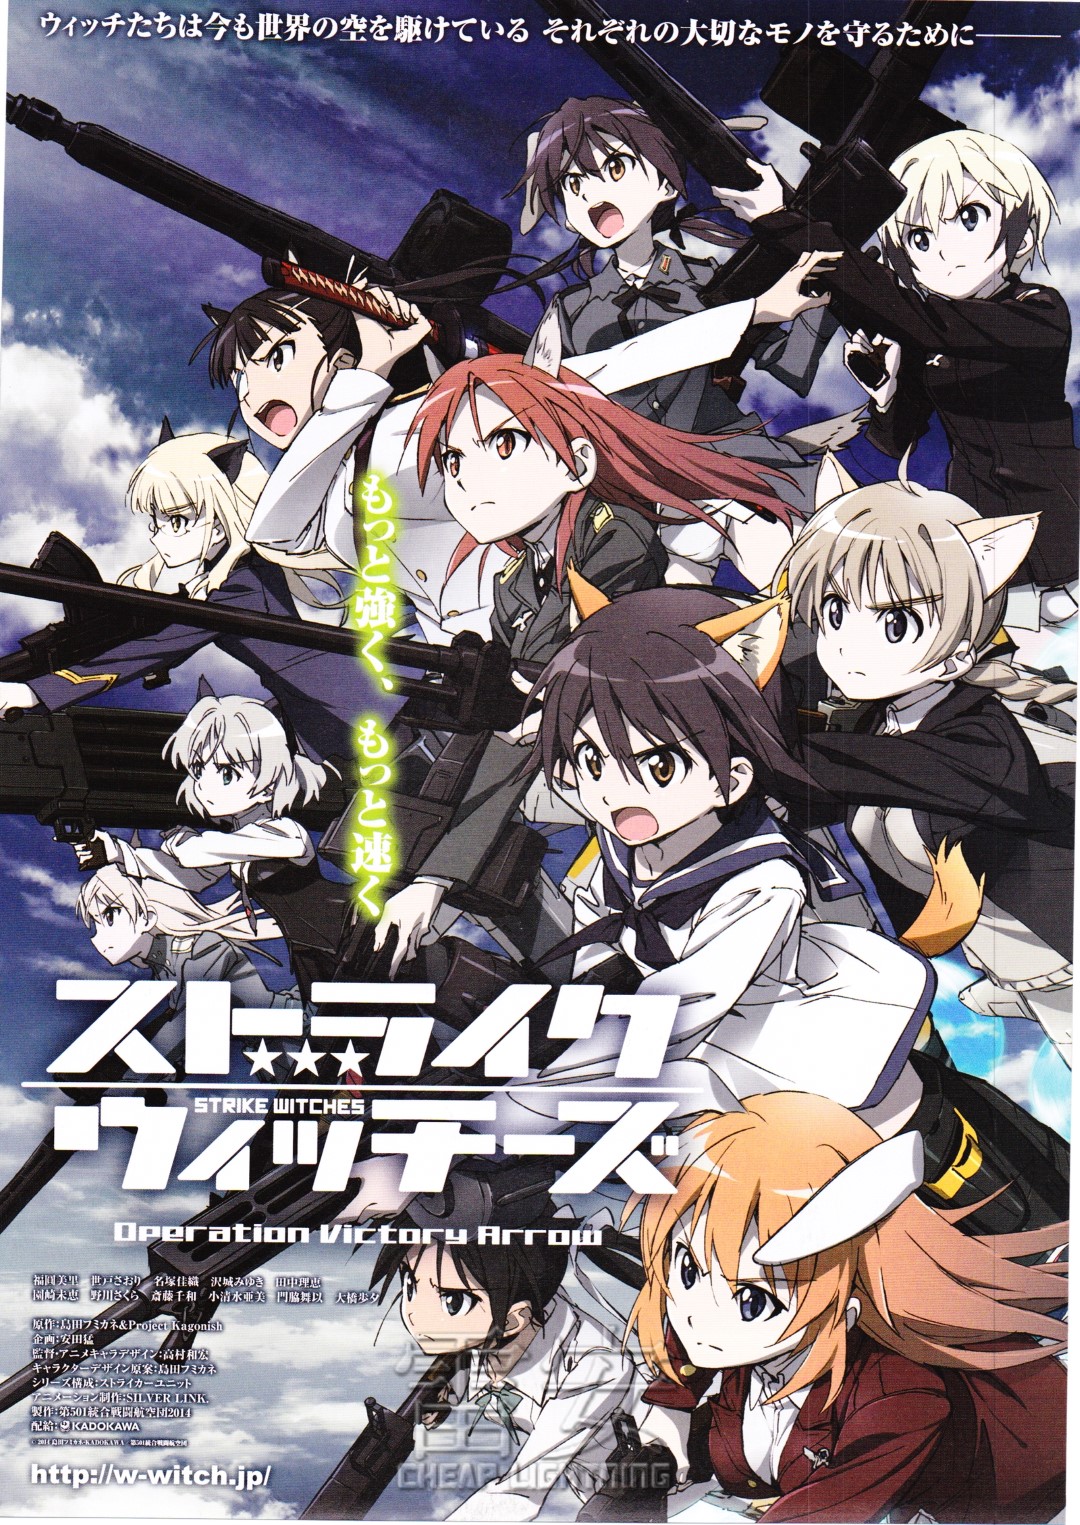 Strike Witches: The Movie #16